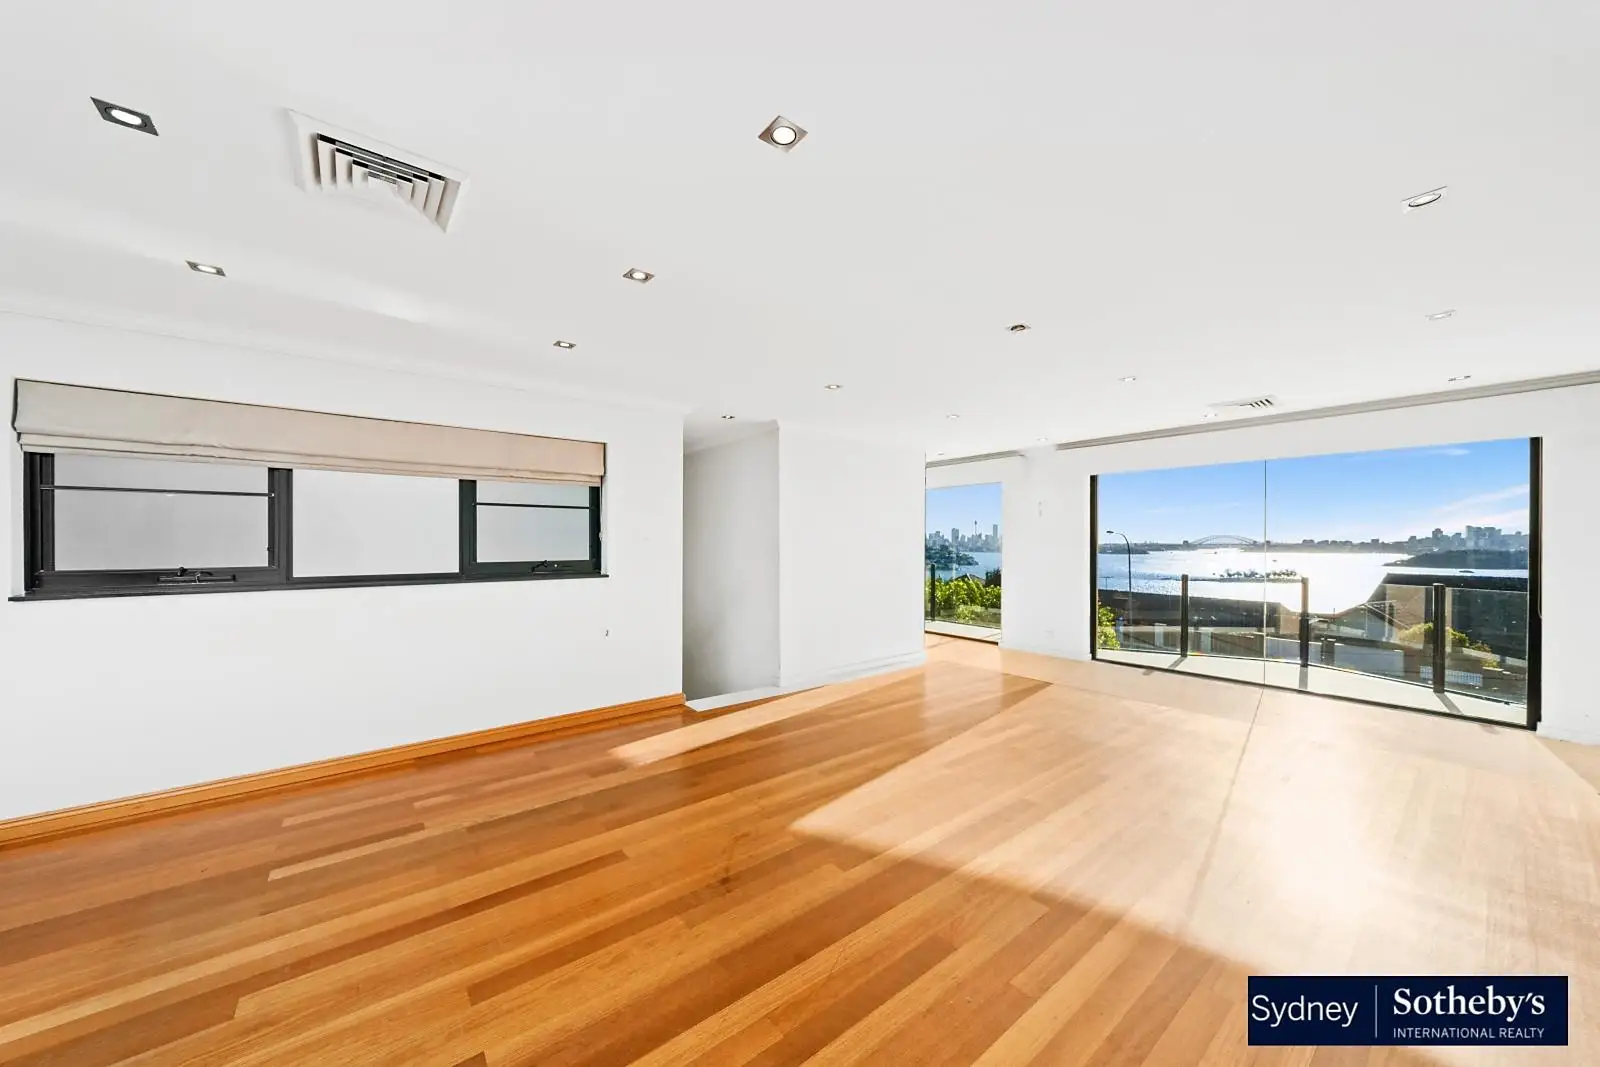 31a New South Head Road, Vaucluse Leased by Sydney Sotheby's International Realty - image 3